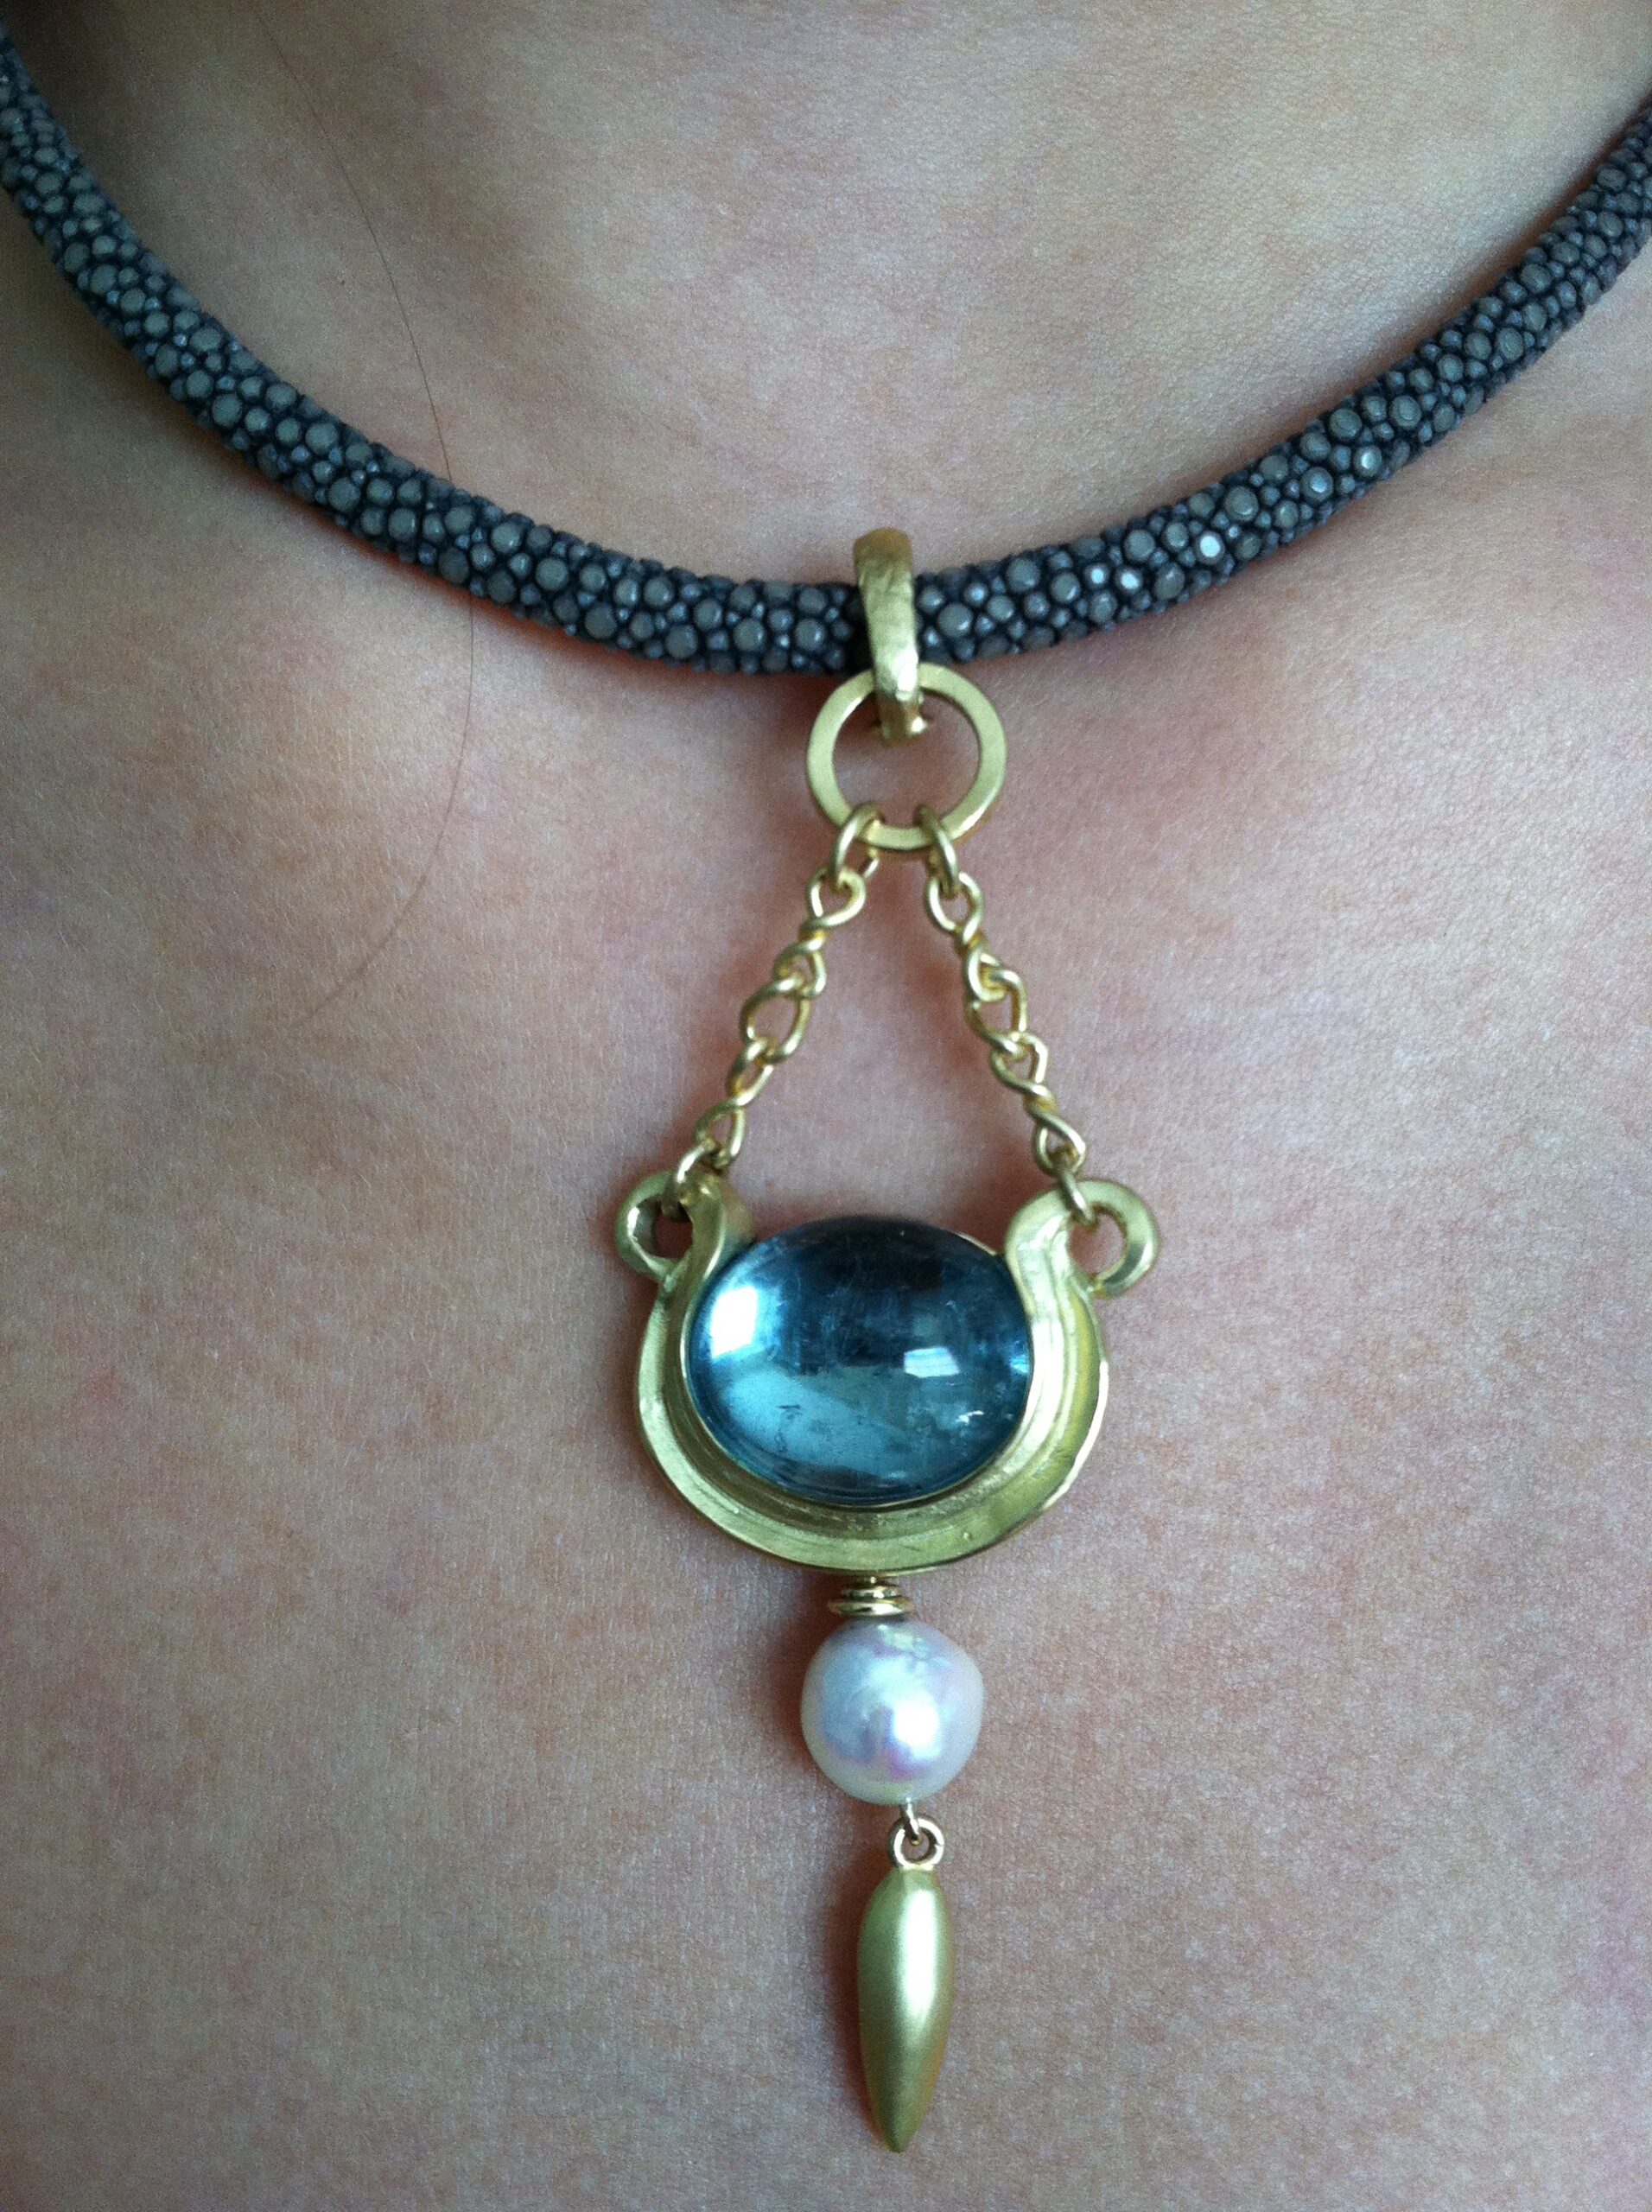 A Cynthia Renee bespoke pendant featuring an aquamarine cabochon, designed with a feeling of antiquity